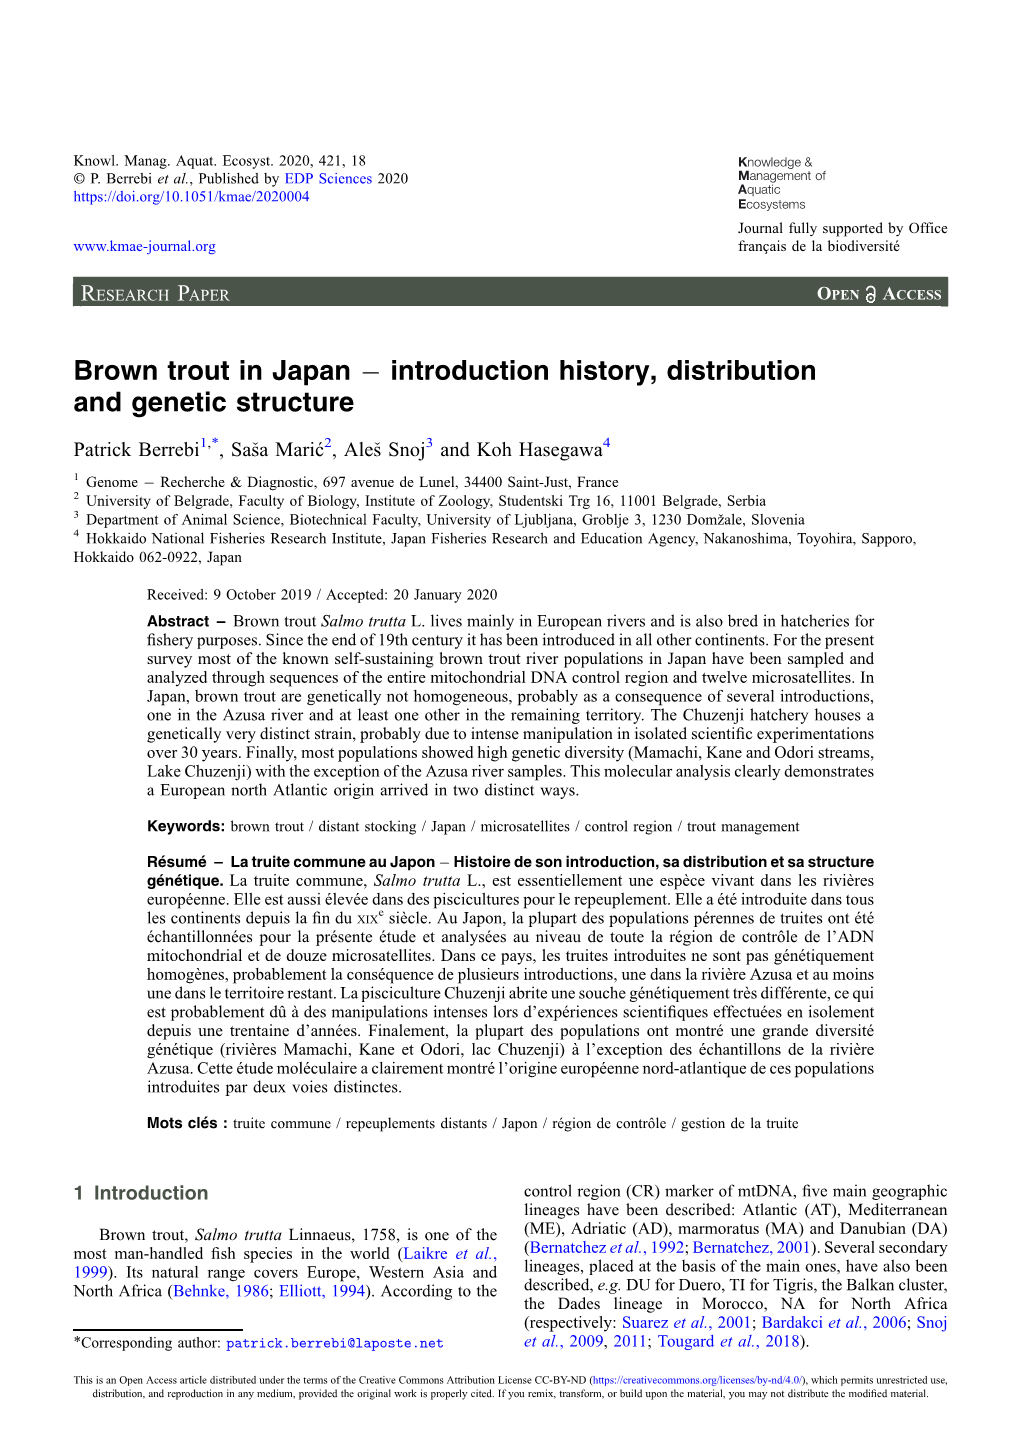 Brown Trout in Japan À Introduction History, Distribution and Genetic Structure